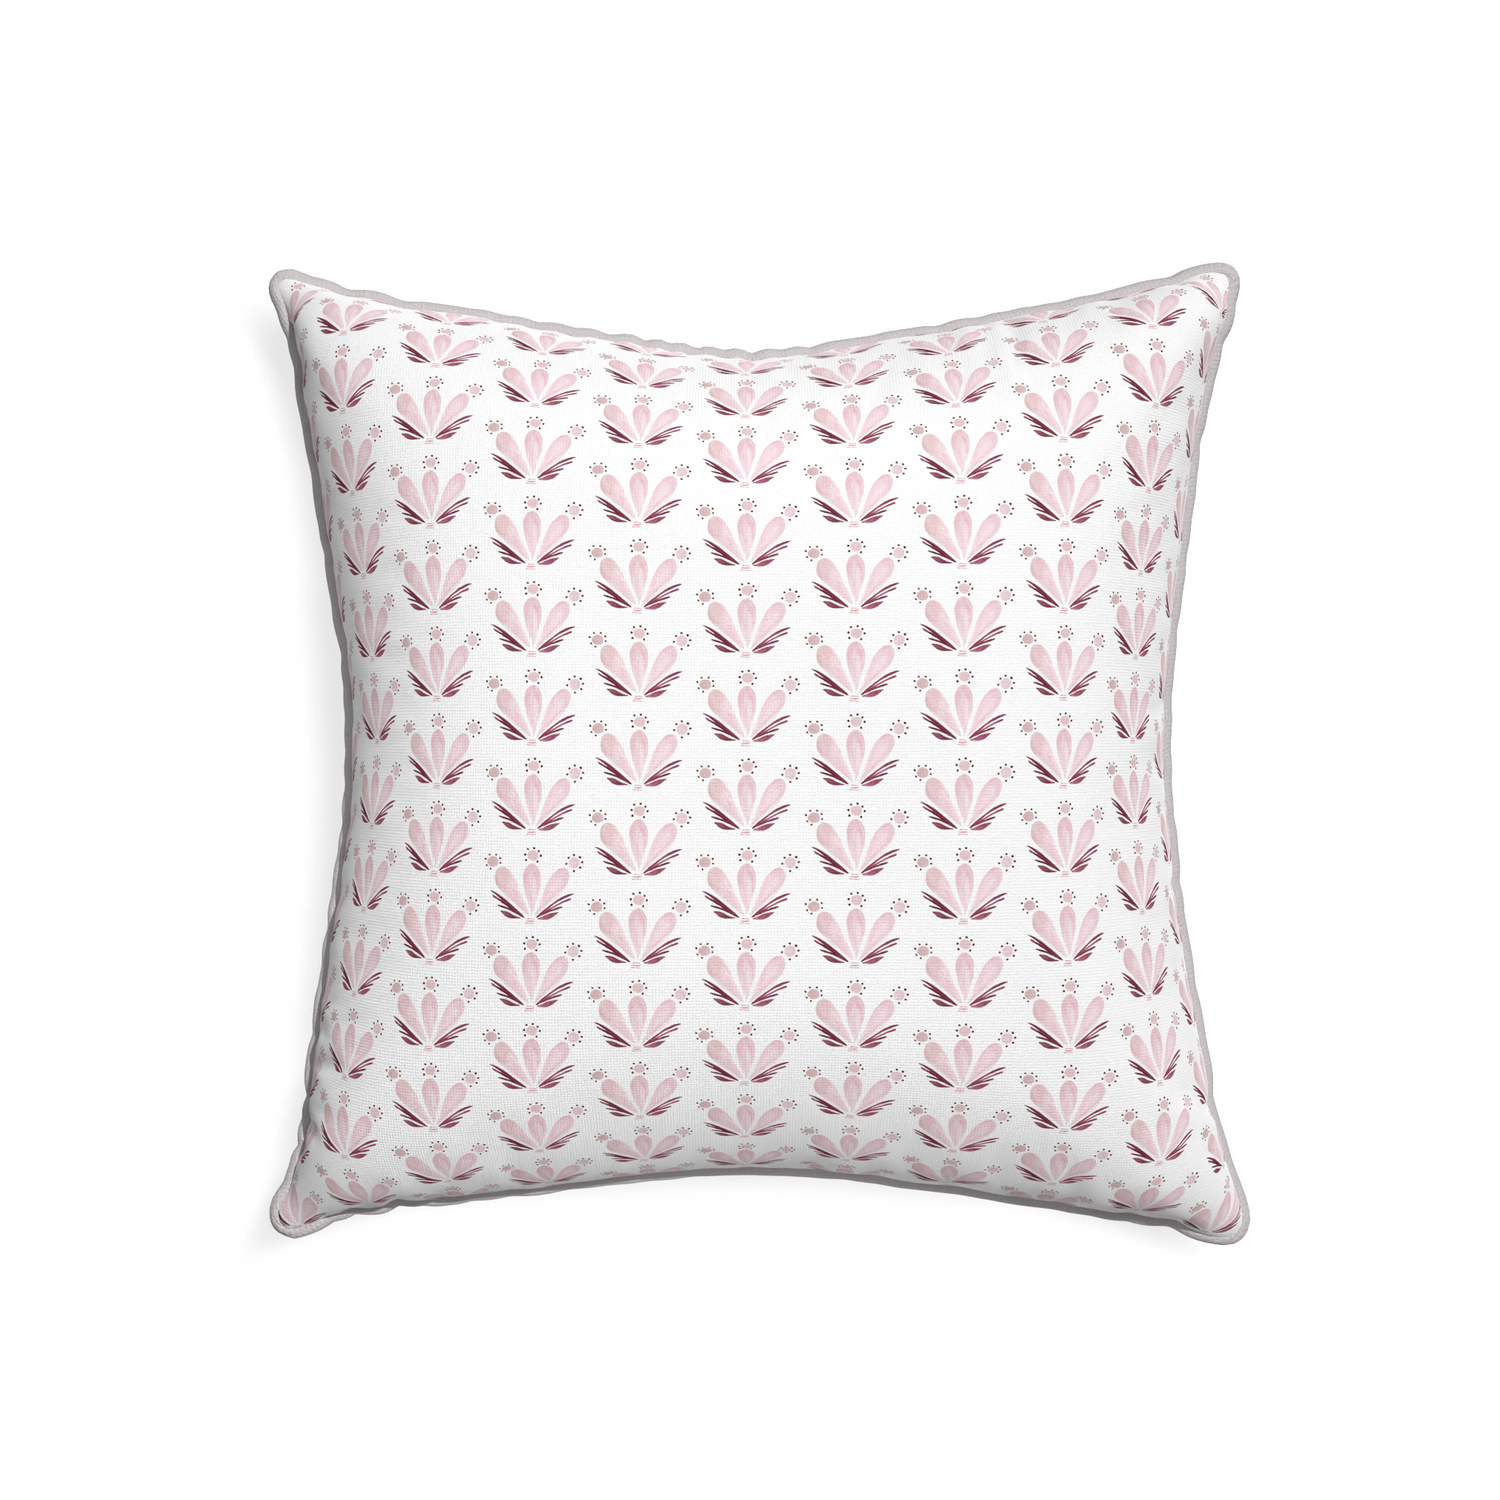 22-square serena pink custom pillow with pebble piping on white background